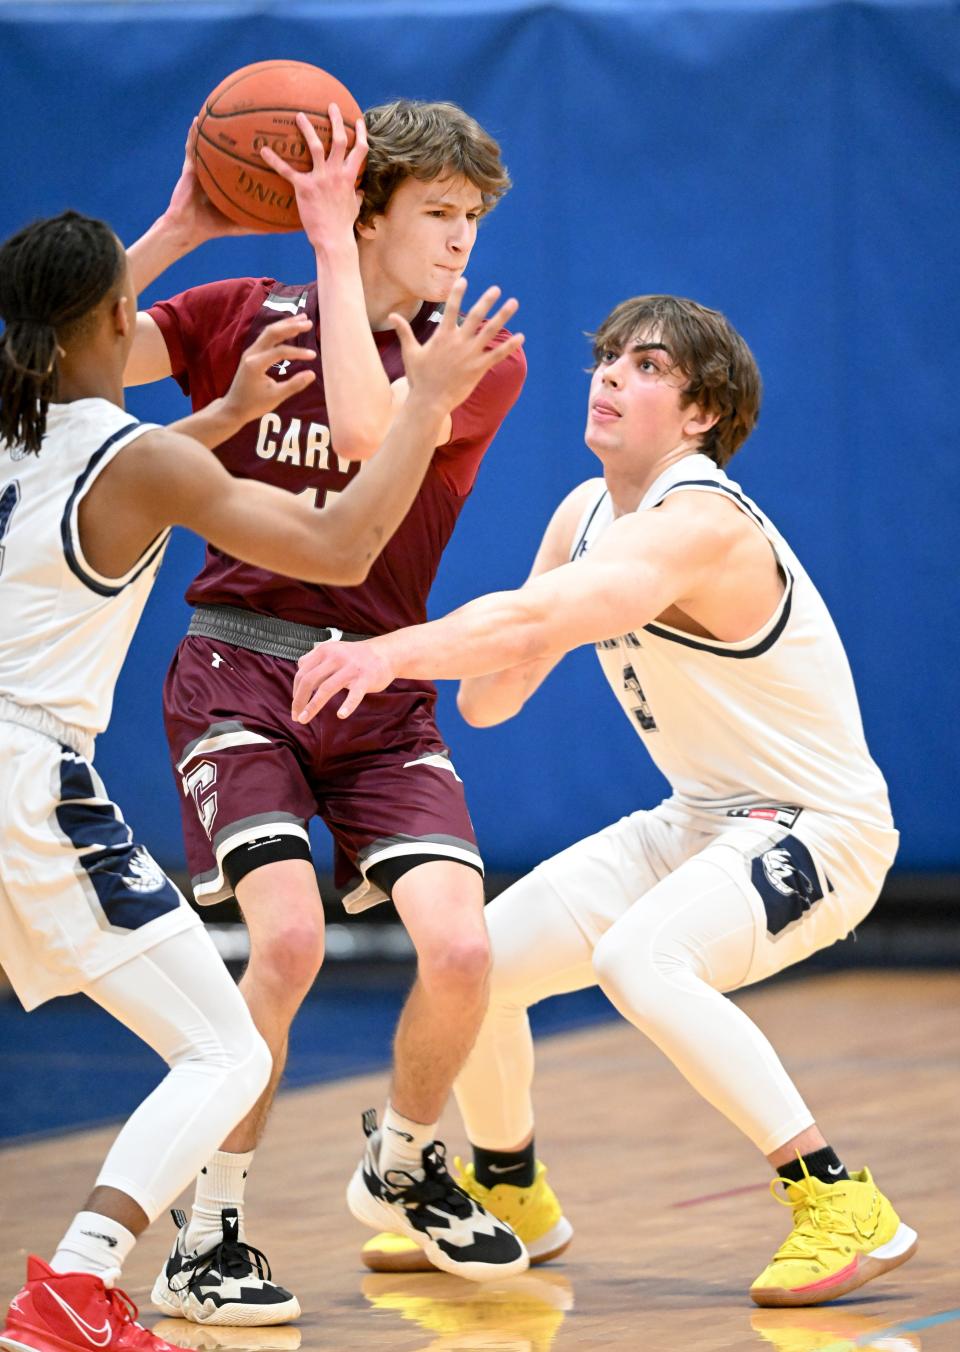 In this March 2022 photo, Charlie Condon of Carver is pressured by Jaeden Greenleaf and Tamarr Washington of Cape Cod Academy in the MIAA Div. 4 round of 32 basketball game.
(Photo: Ron Schloerb/Cape Cod Times)